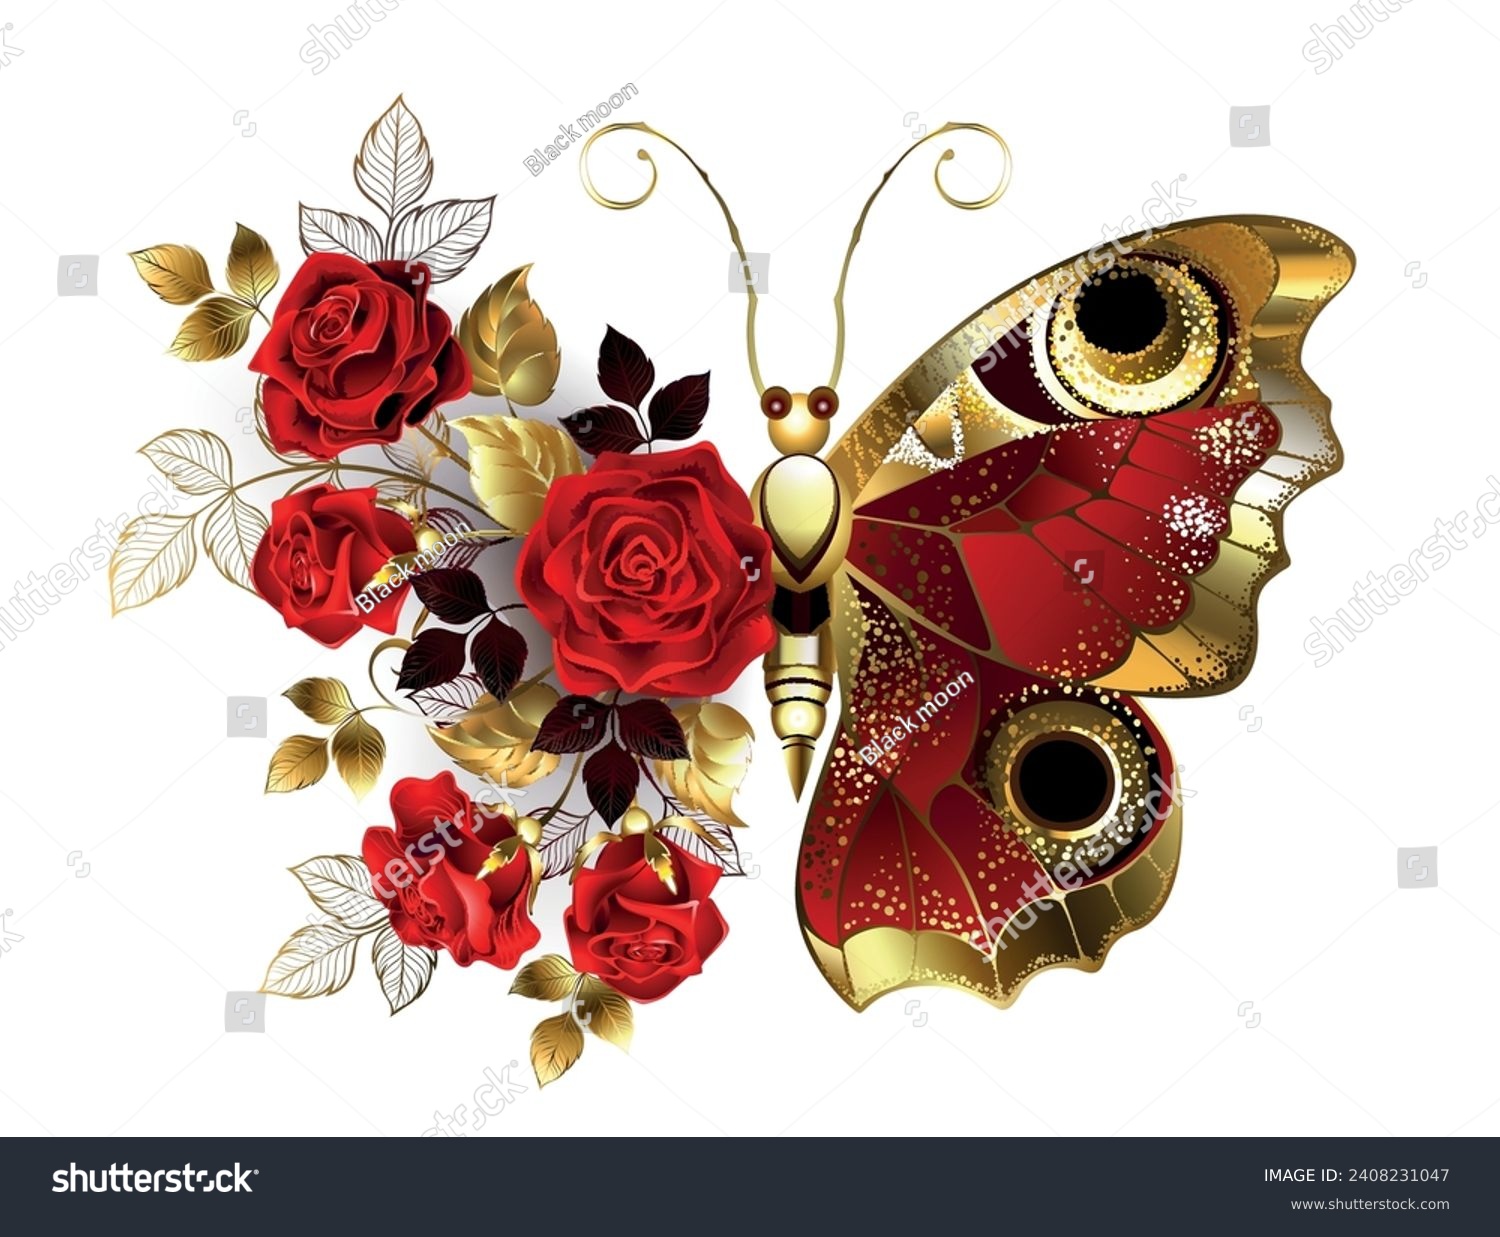 SVG of Red peacock eyed flower butterfly with red textured wing, decorated with composition of red, artistically painted roses with golden stems and leaves on white background. Hand drawn vector art. svg